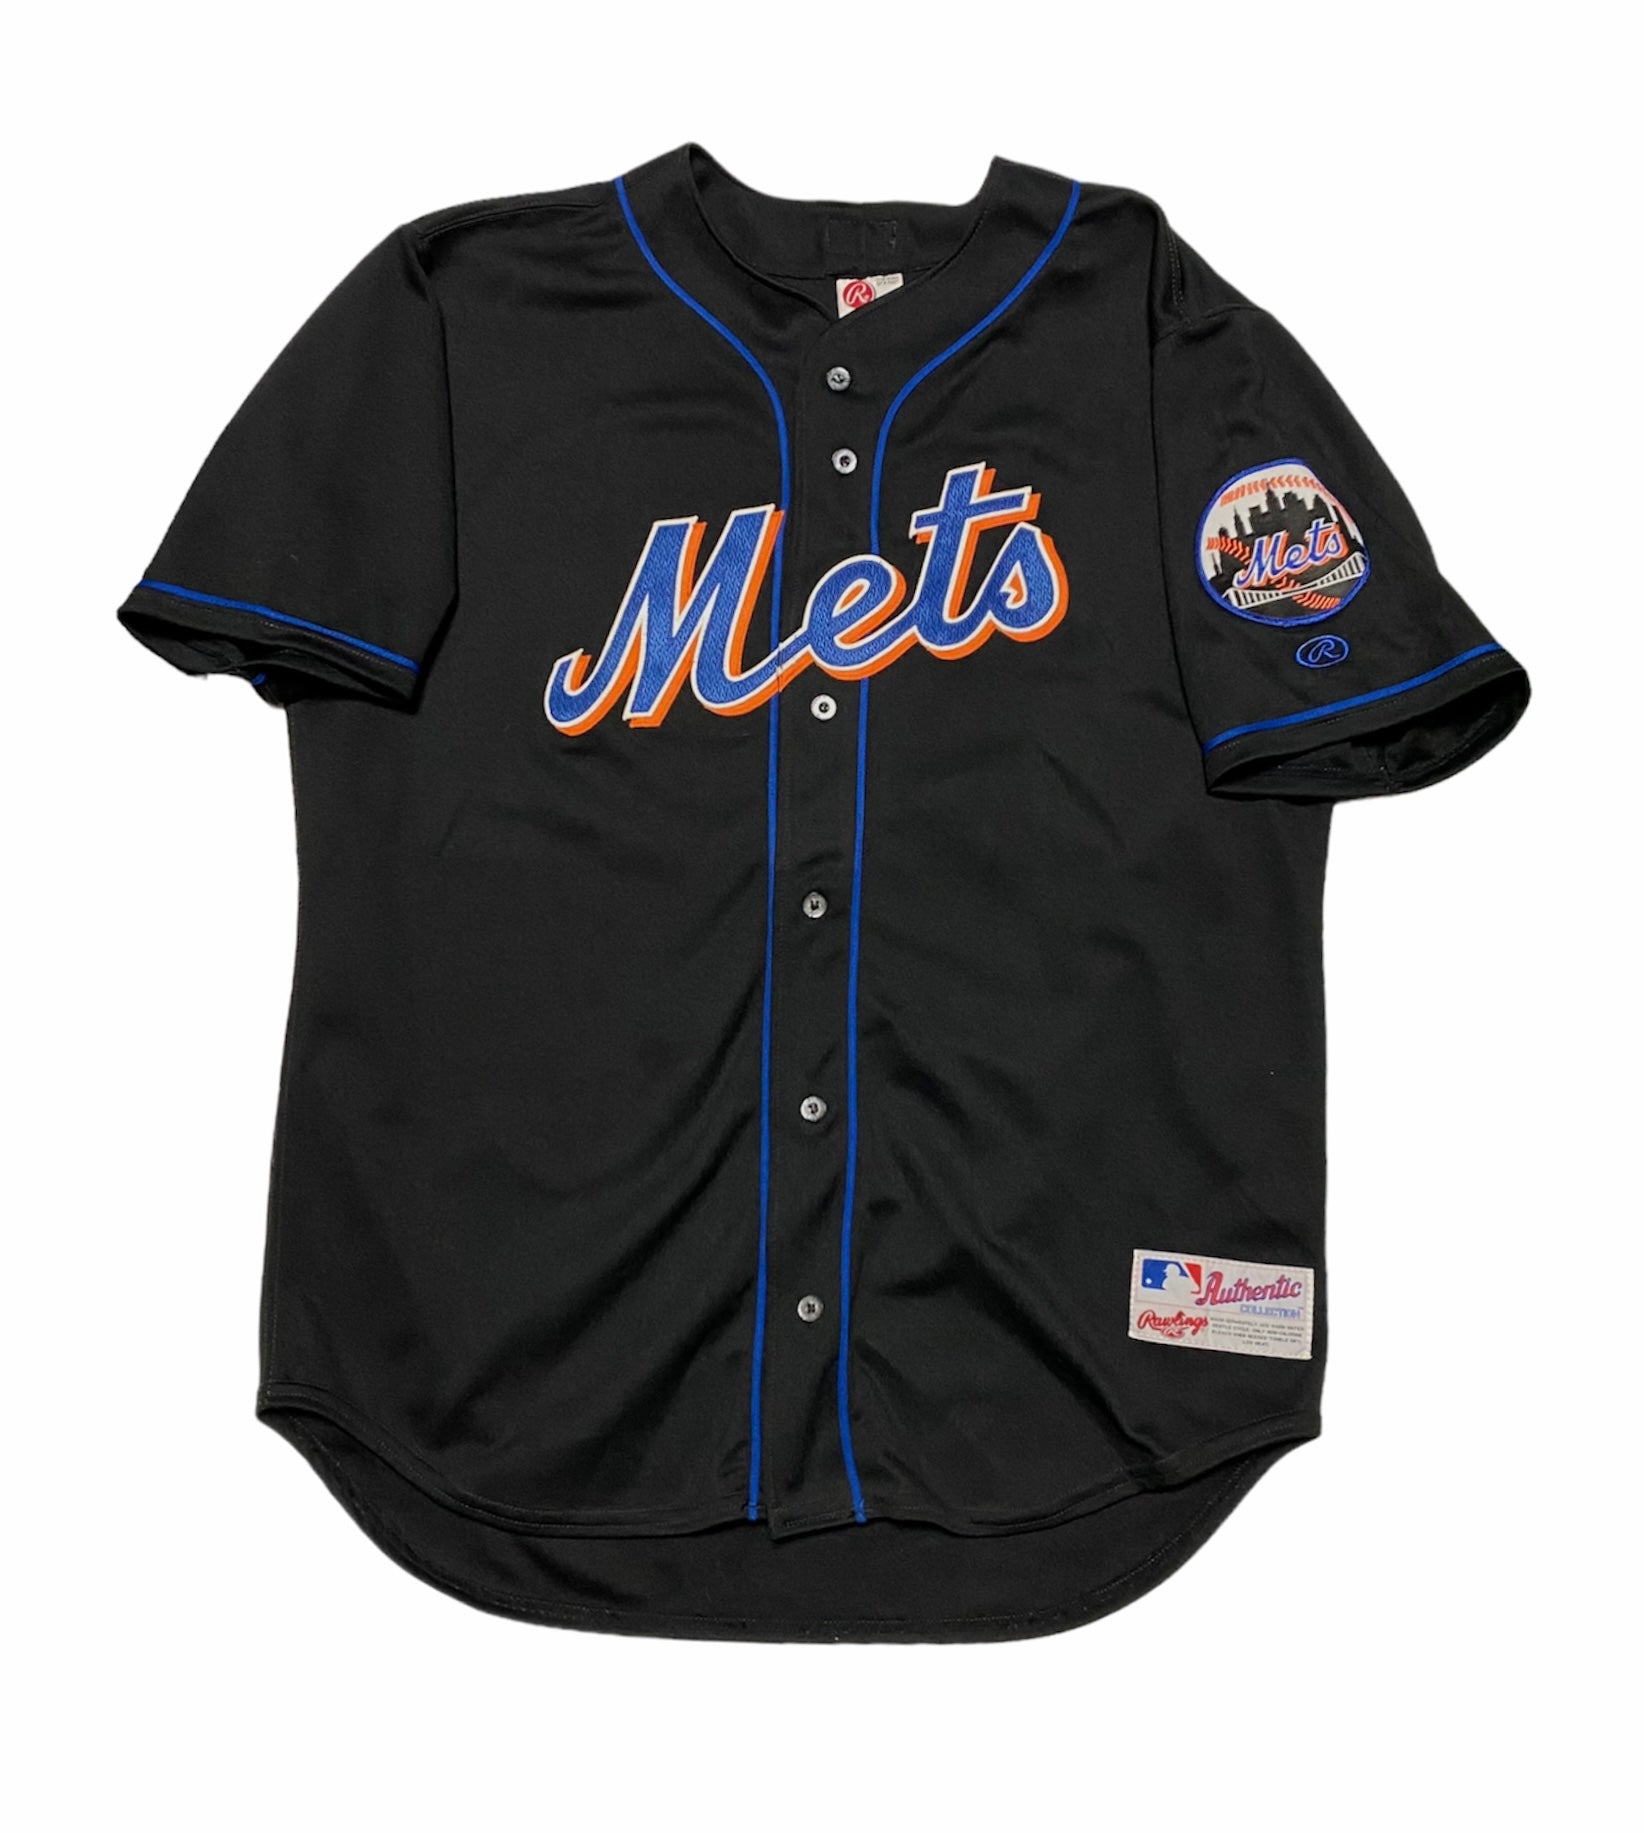 Alternate New York Mets jerseys launch on MLB Shop, exclusively